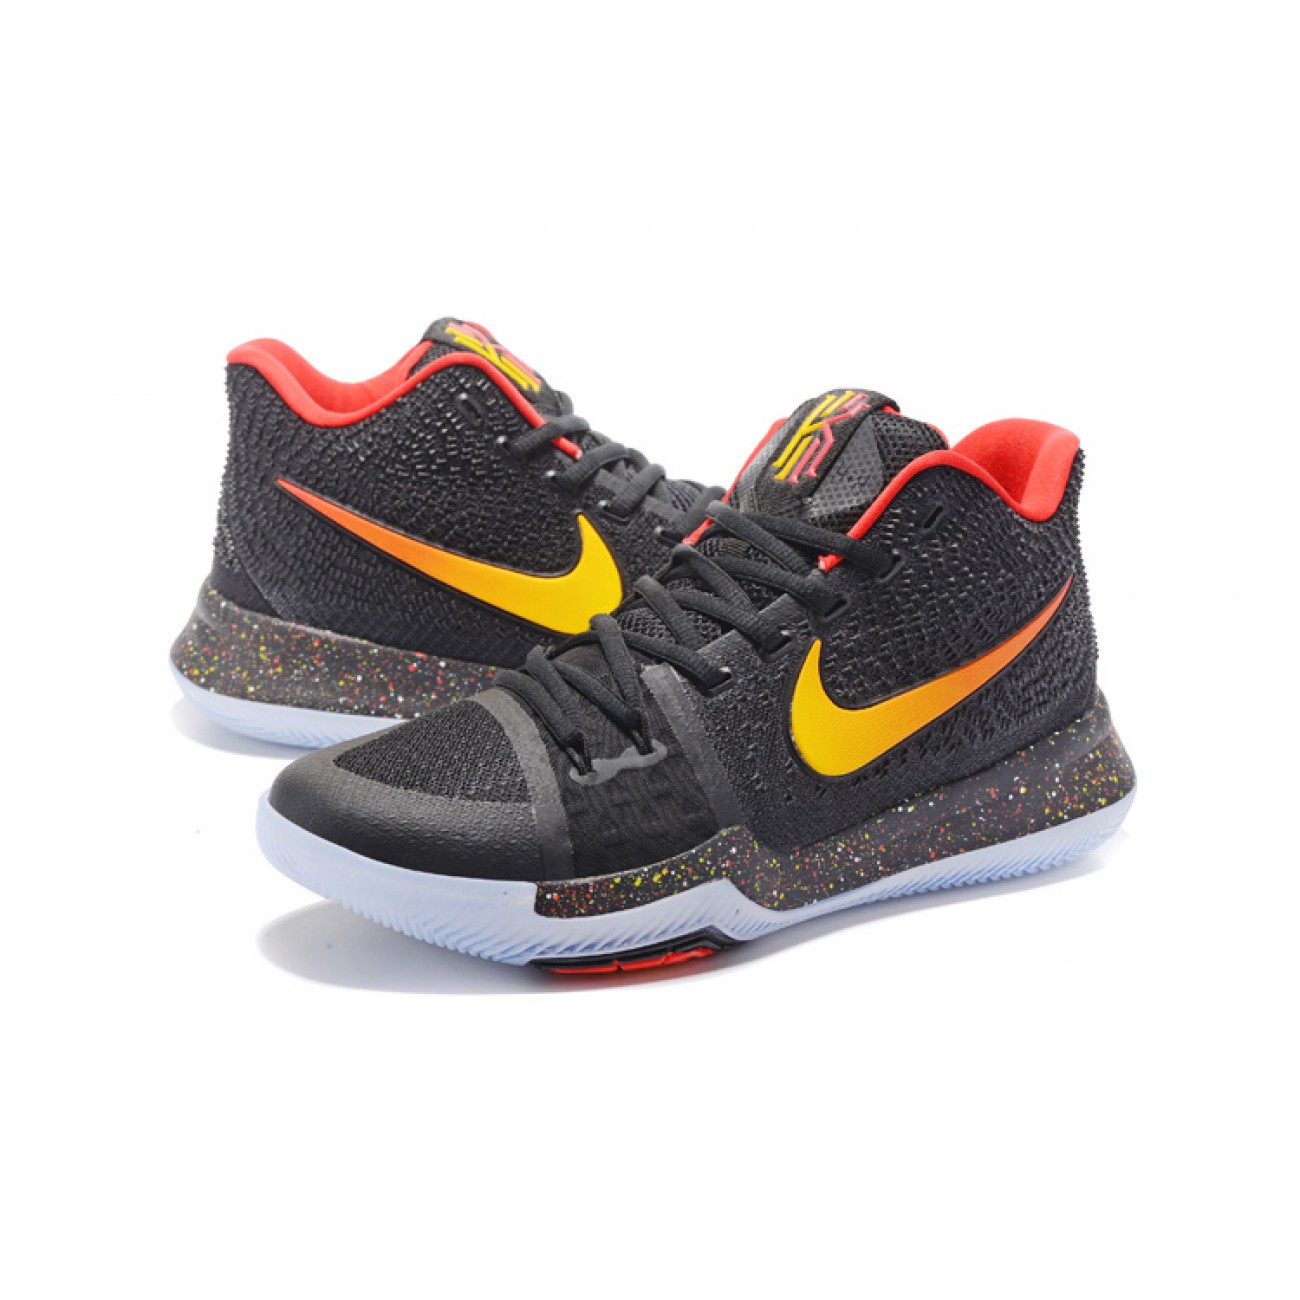 Kyrie 3 Black/Red/Gold